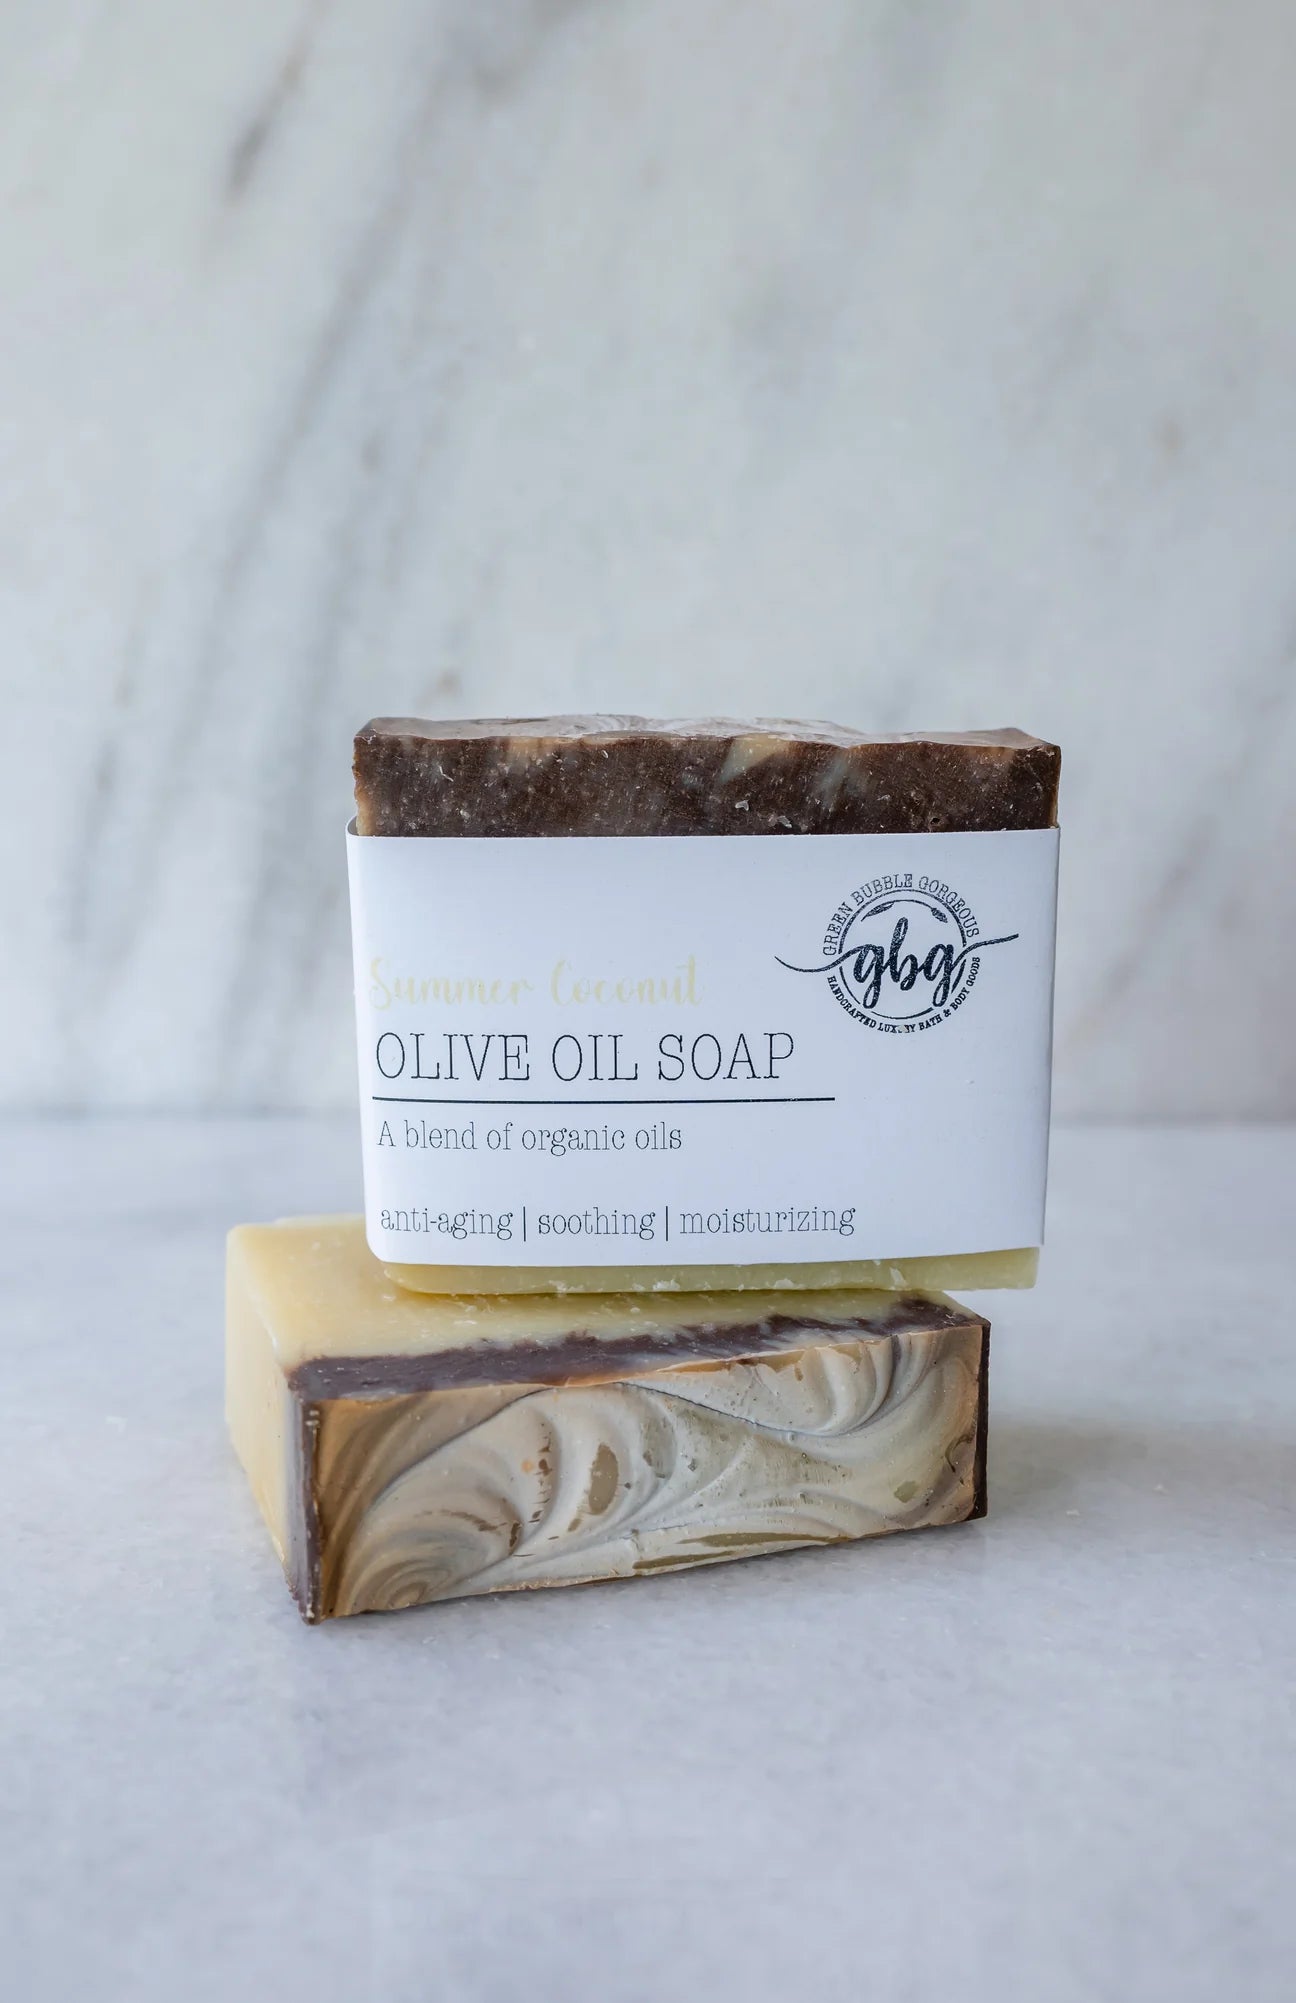 Summer Coconut Olive Oil Soap